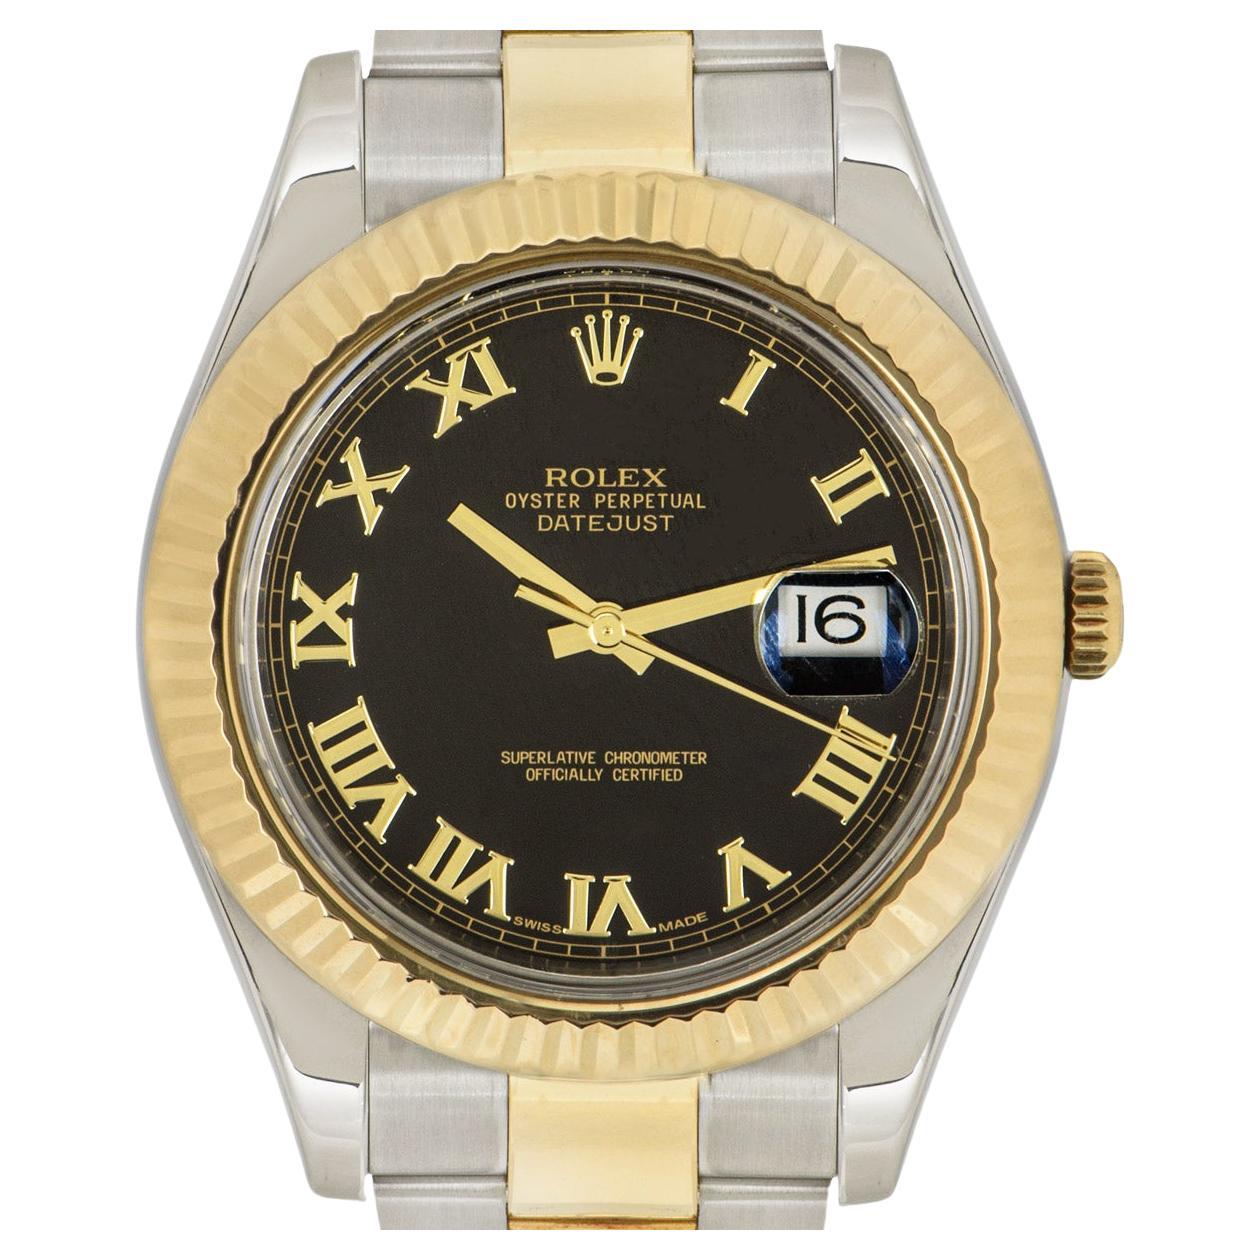 A 41mm Datejust II in Oystersteel and yellow gold by Rolex. Featuring a black dial with applied roman numerals and a fluted yellow gold bezel. Fitted with scratch-resistant sapphire crystal and a self-winding automatic movement. The Oyster bracelet